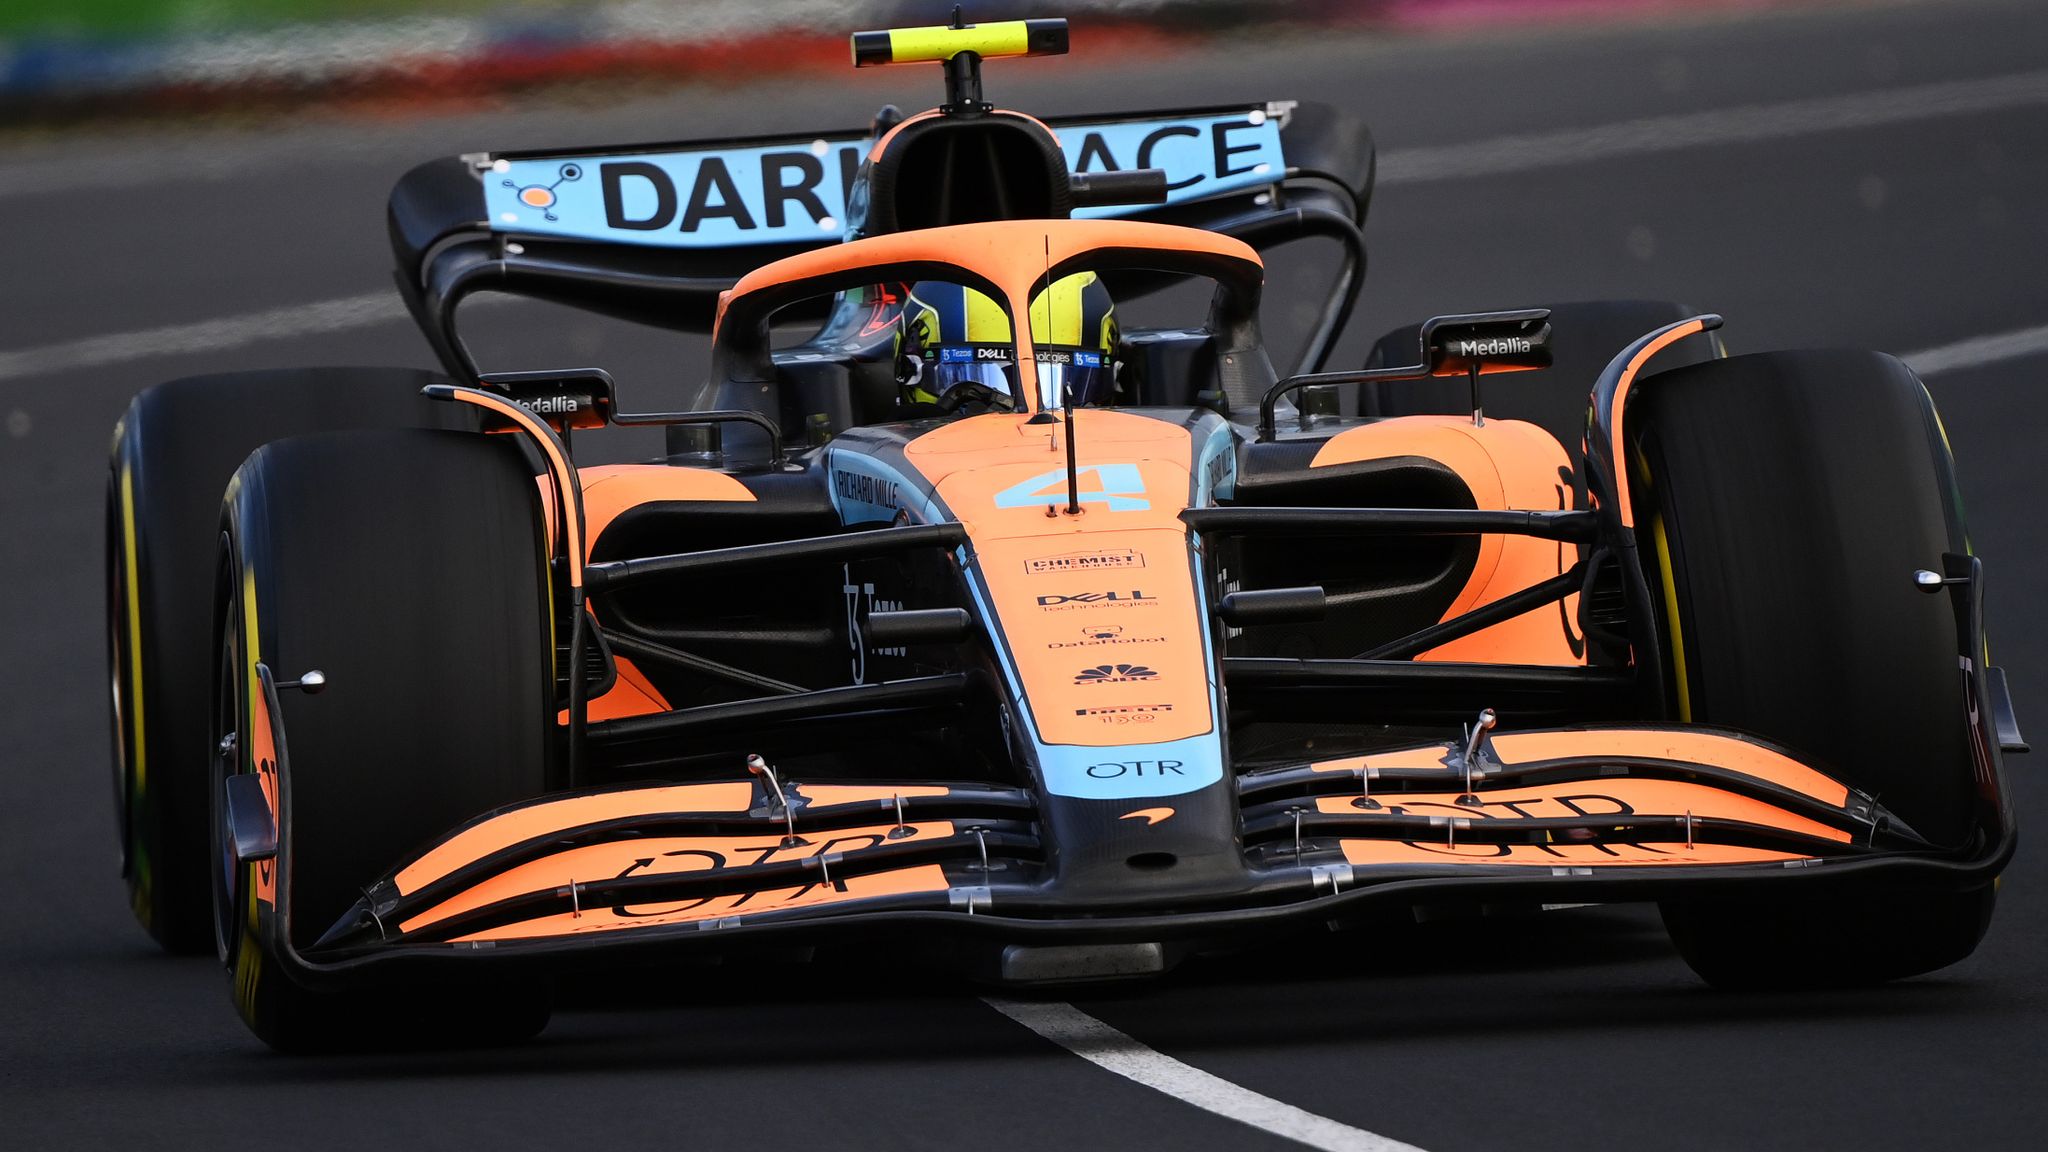 Australian GP Lando Norris ready for Mercedes battle after superb fourth for McLaren in qualifying F1 News